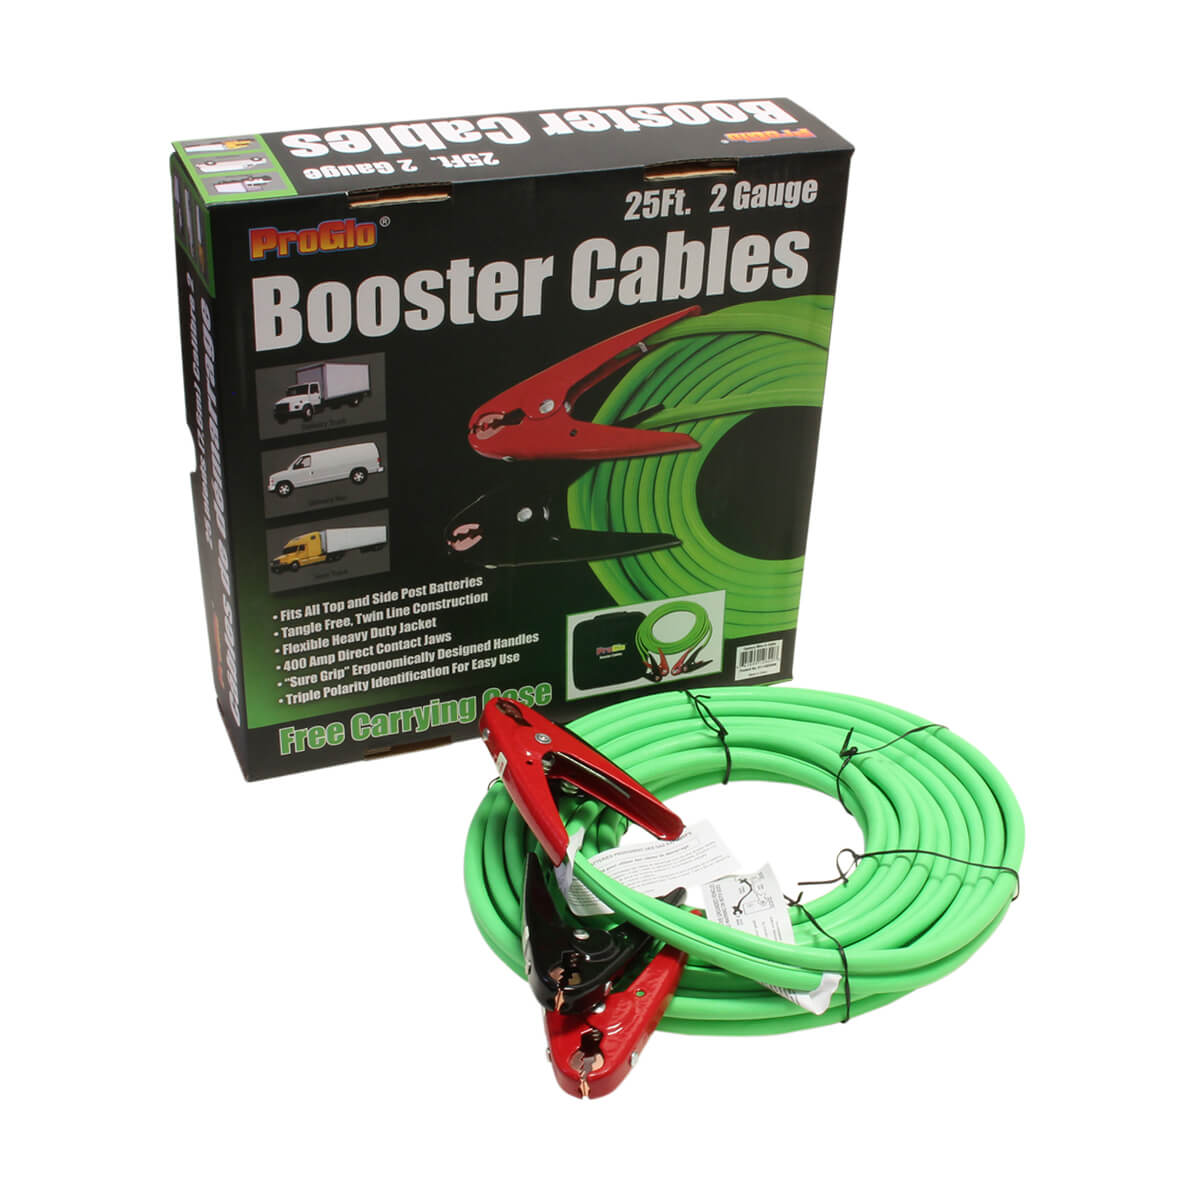 Pro Glo® Booster Cables - 2 Gauge with Case - 25-ft